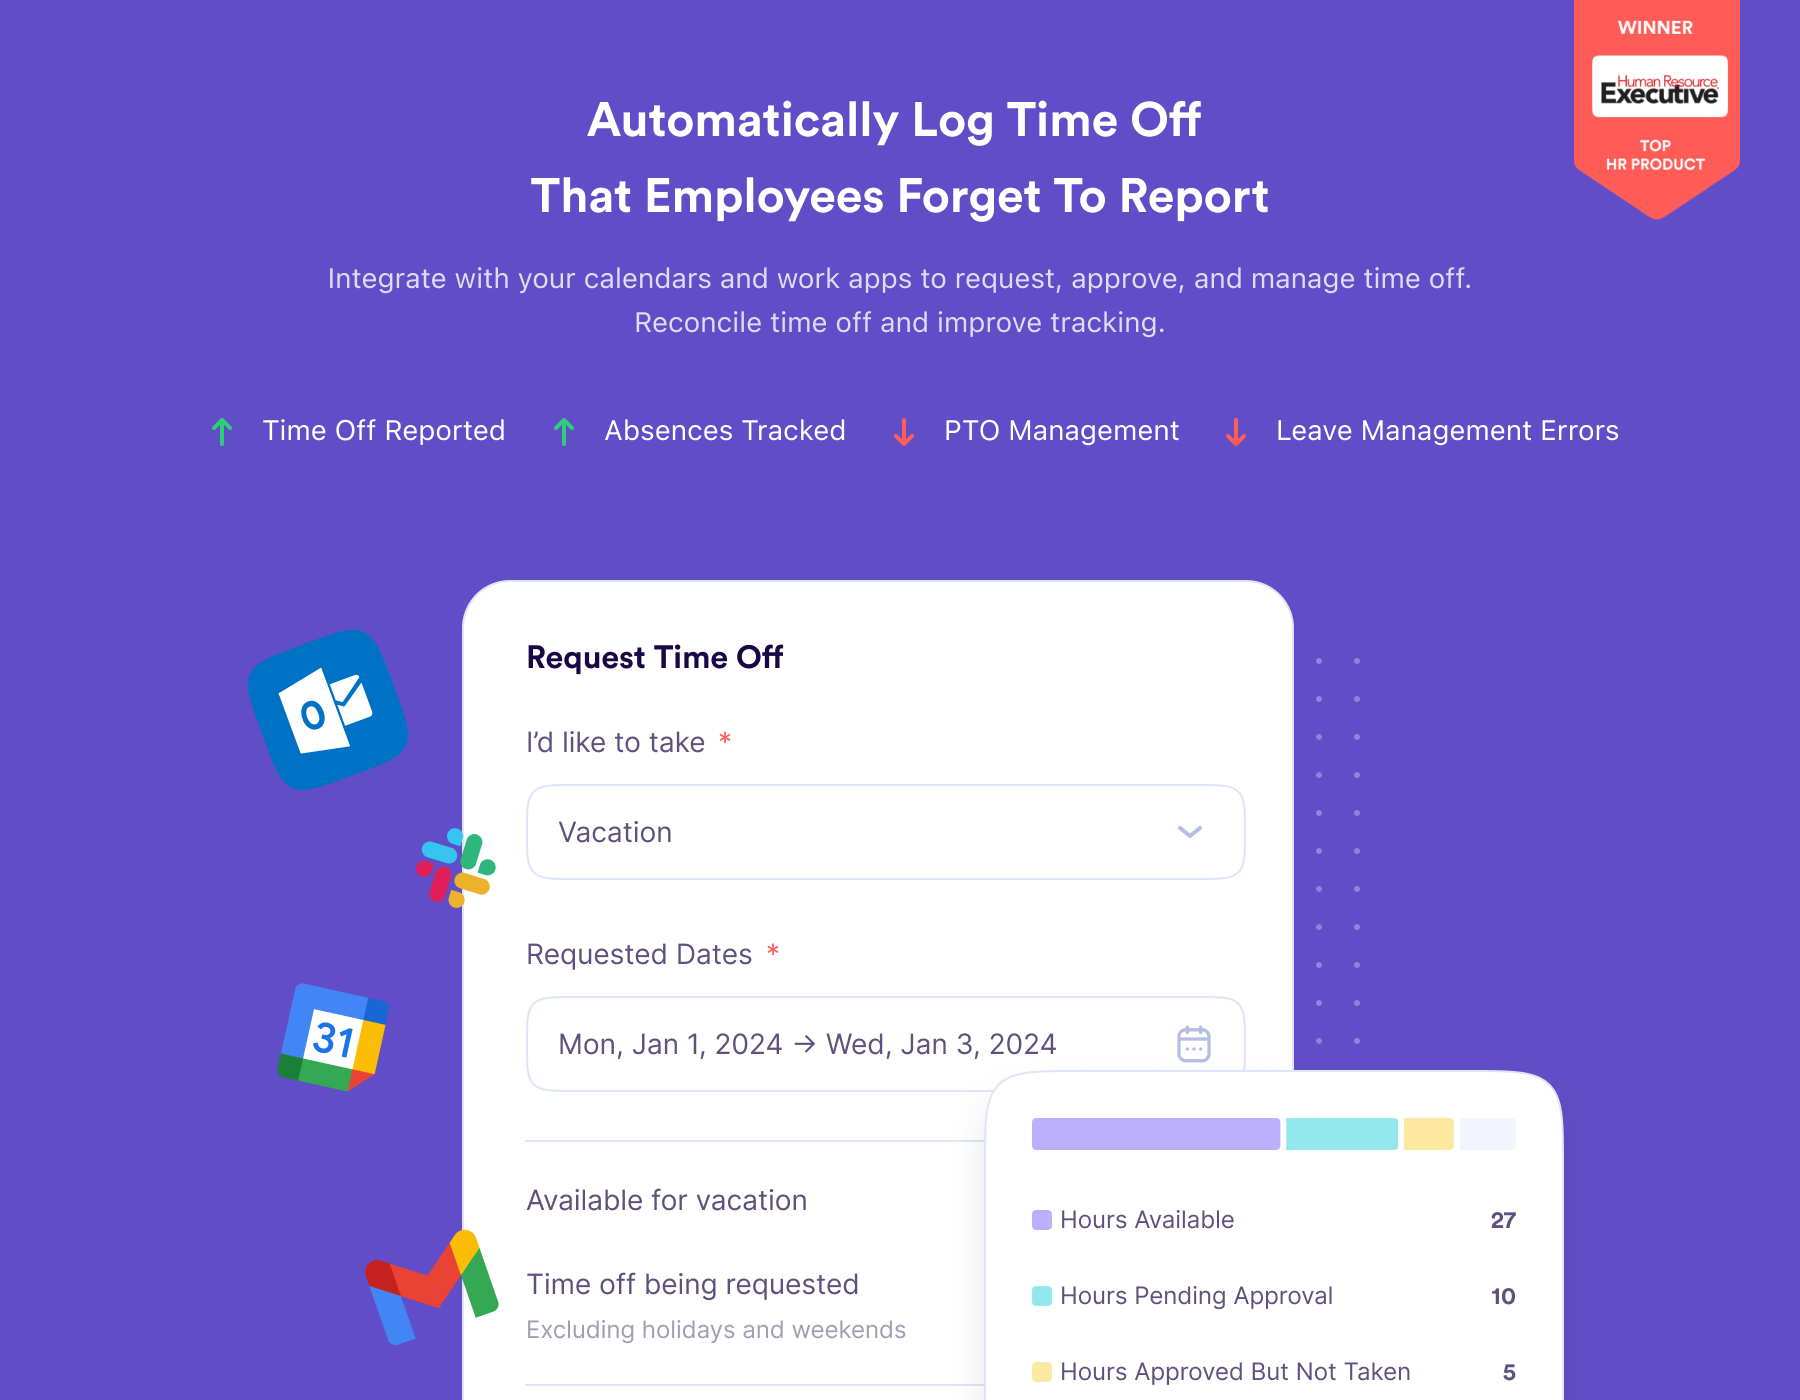 Spend less time chasing down managers about their employee’s absences by identifying unreported time off in email, chat, and calendars. Integrate with your calendars and work apps to request, approve, and manage time off where employees already work.